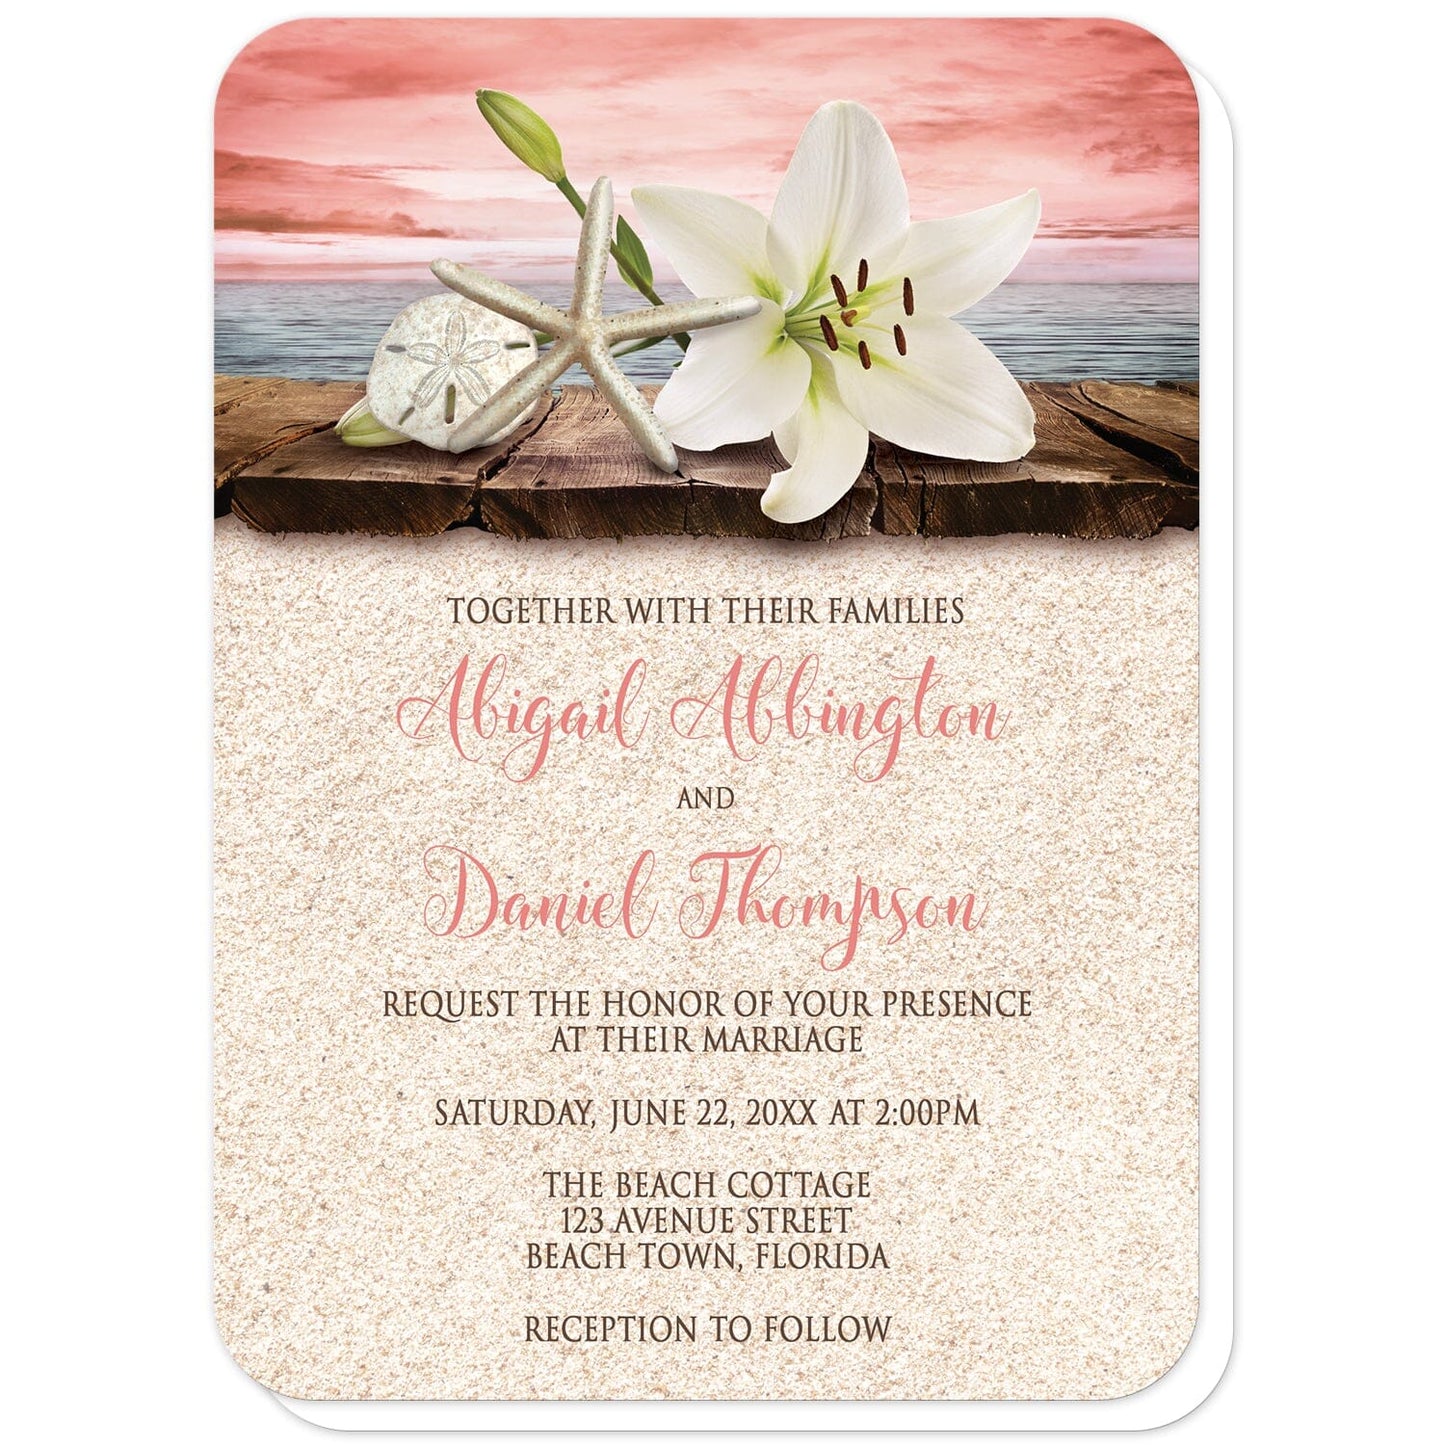 Lily Seashells and Sand Coral Beach Wedding Invitations (with rounded corners) at Artistically Invited. Tropical lily seashells and sand coral beach wedding invitations with an elegant white lily, a starfish, and a sand dollar on a rustic wood dock overlooking the open water under a coral sky. Your personalized marriage celebration details are custom printed in dark brown and coral over a beige sand background design below the lily and seashells.